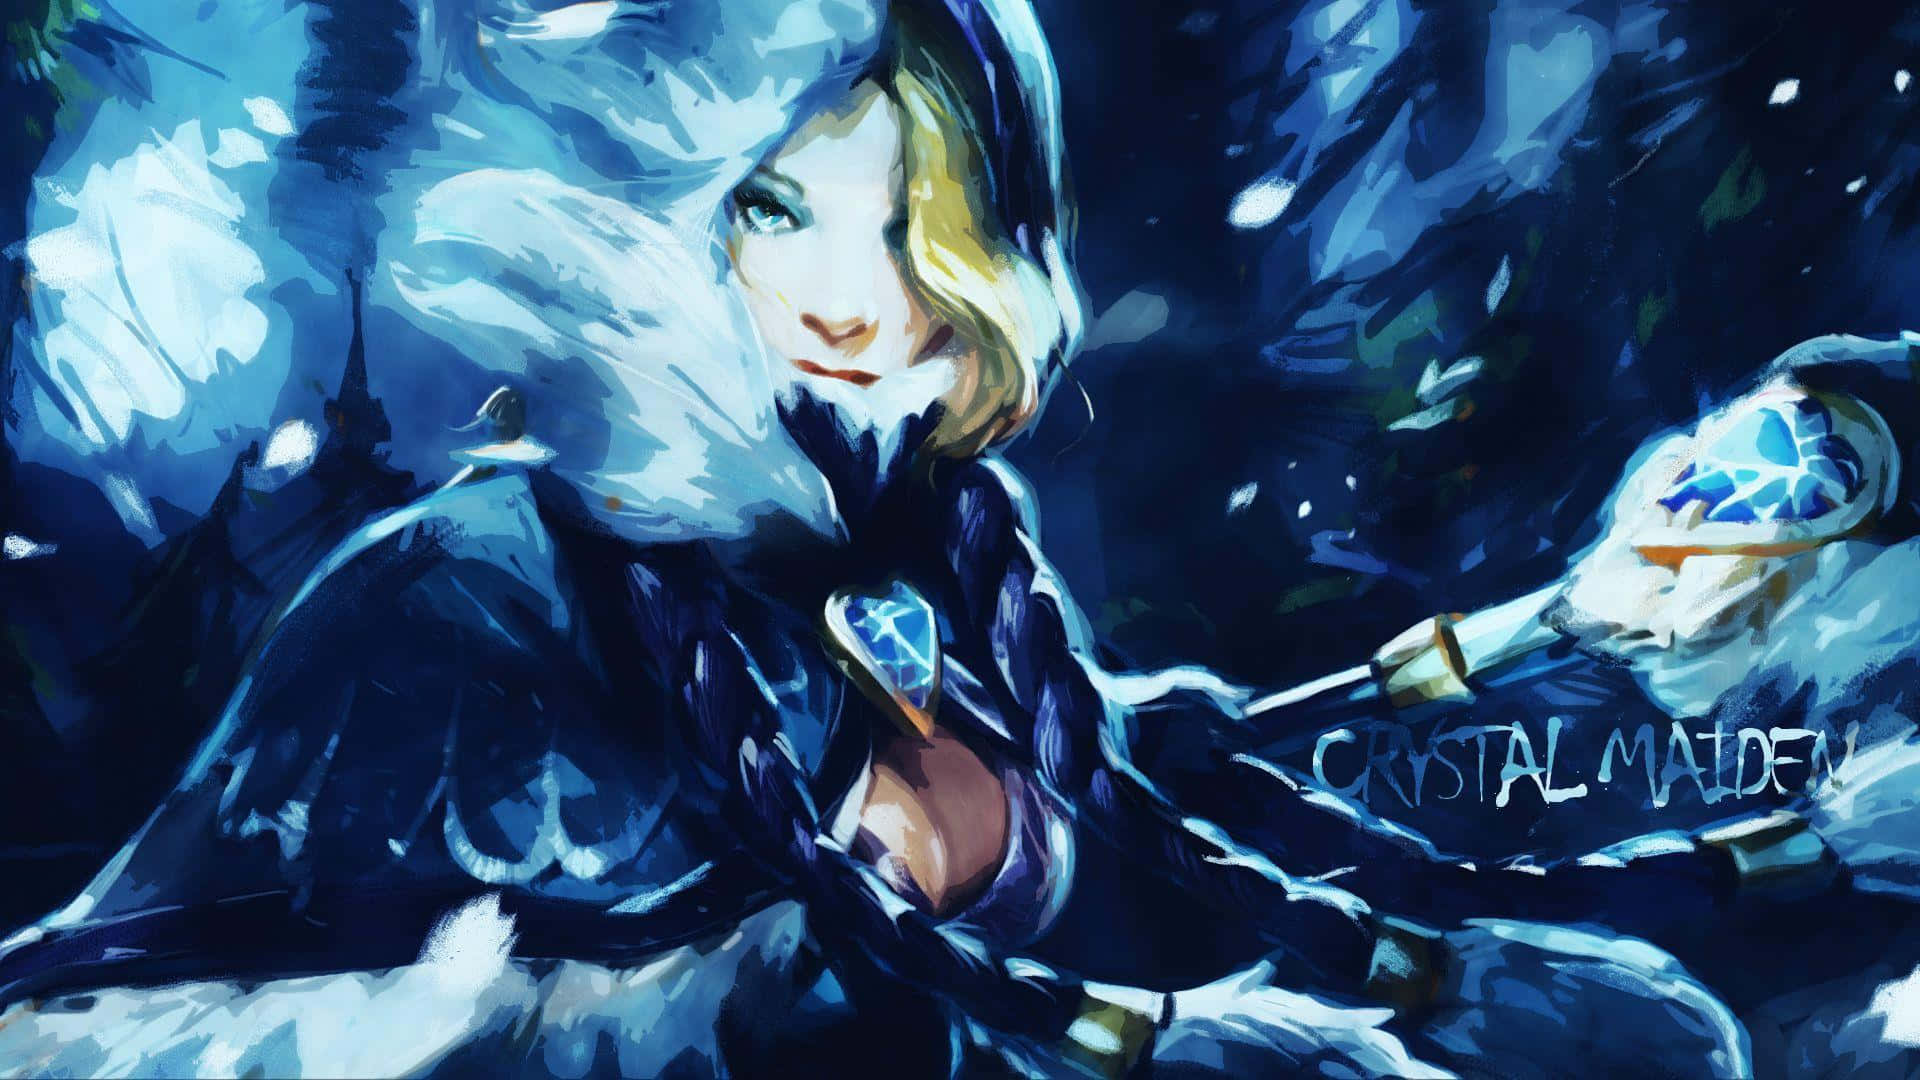 Crystal Maiden - The Frosty Sorceress of Dota 2 Wallpaper